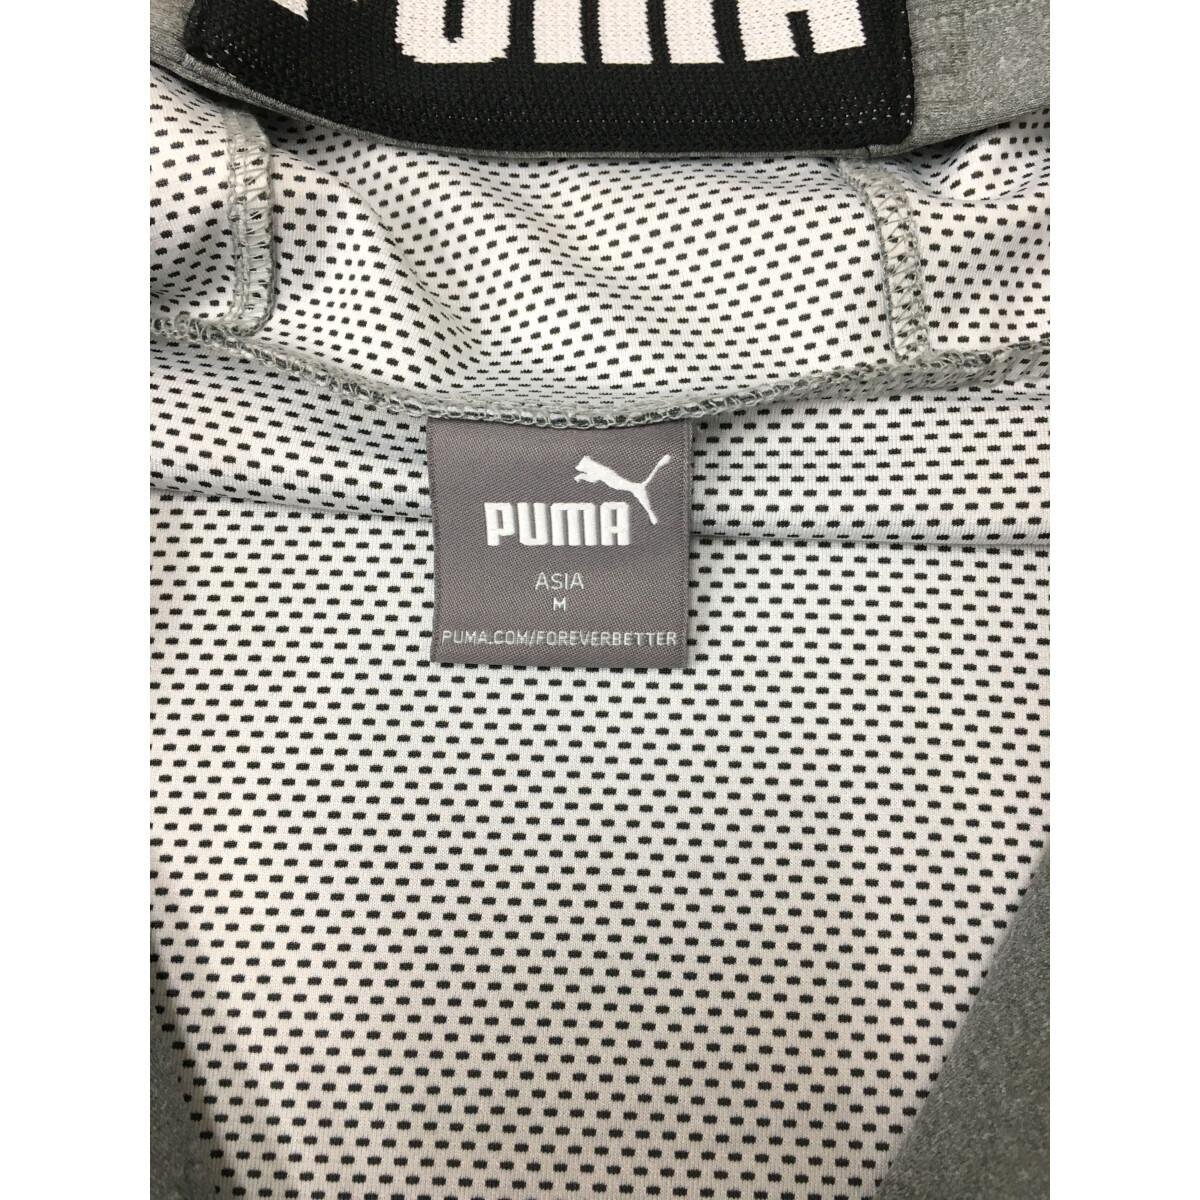 coco* Puma *PUMA* long sleeve double Zip Parker * jersey material * gray / Logo total pattern *M* used * letter pack post service plus shipping possible *87444